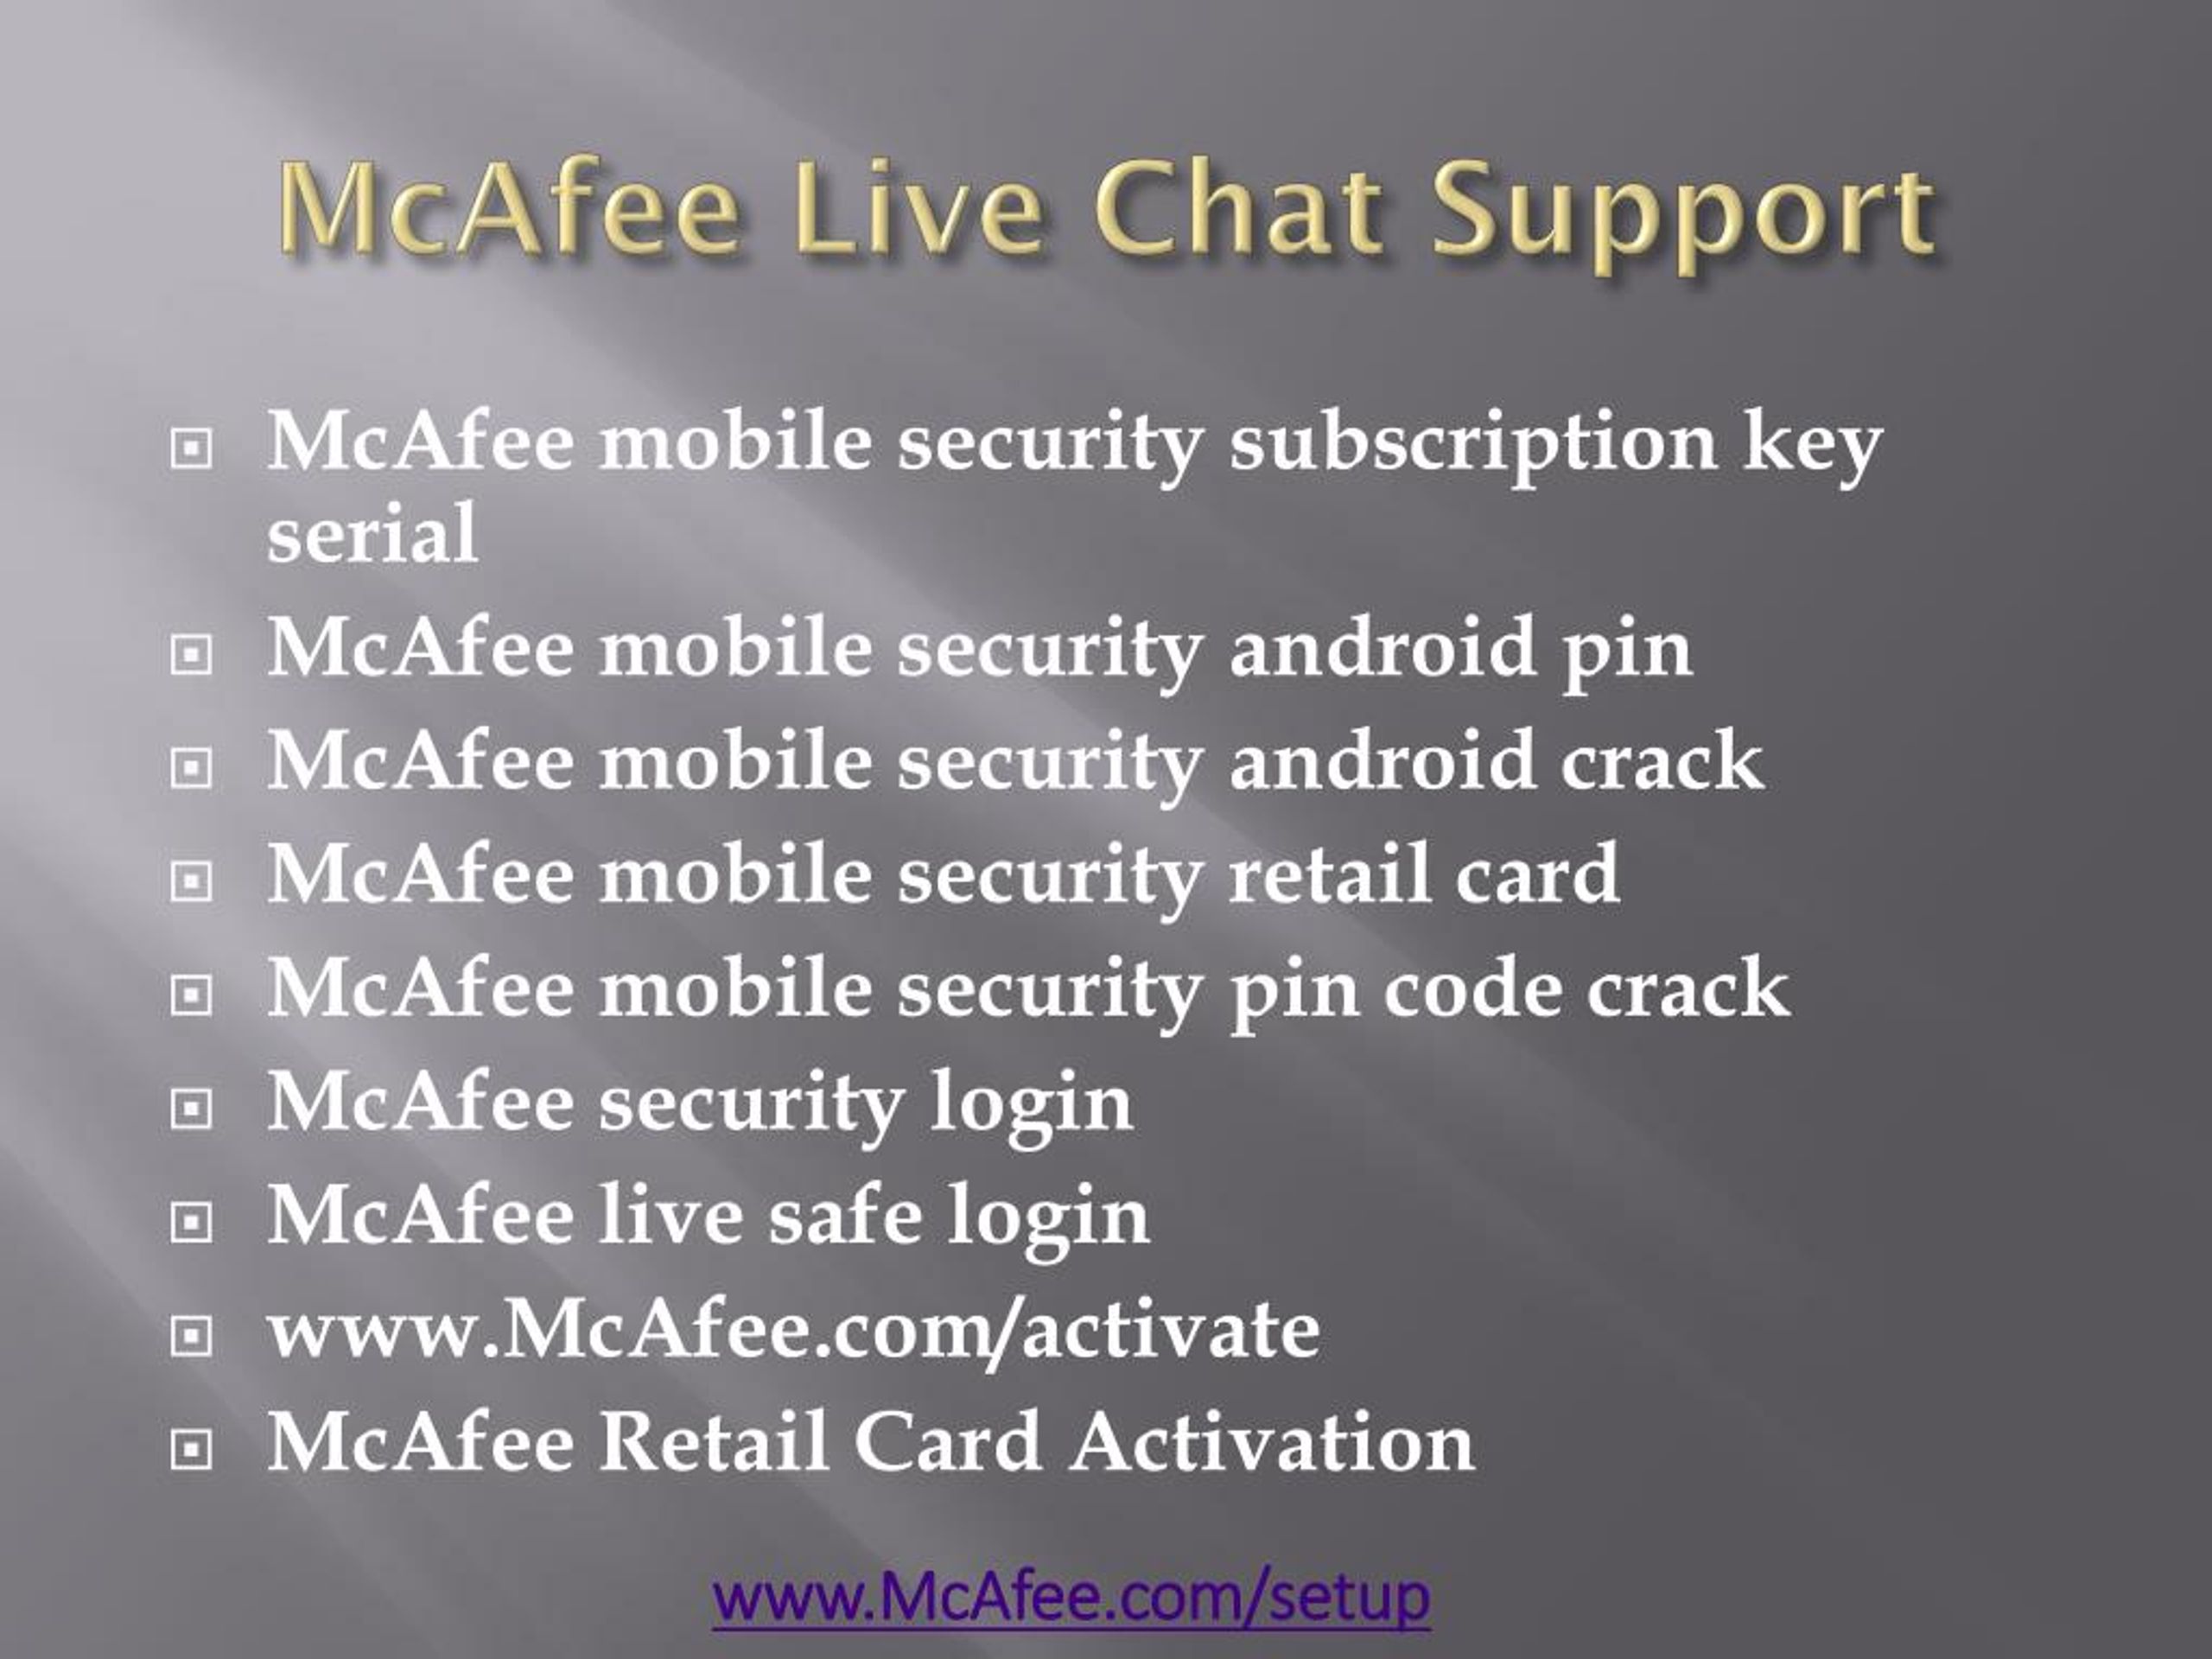 mcafee mobile security pin code crack